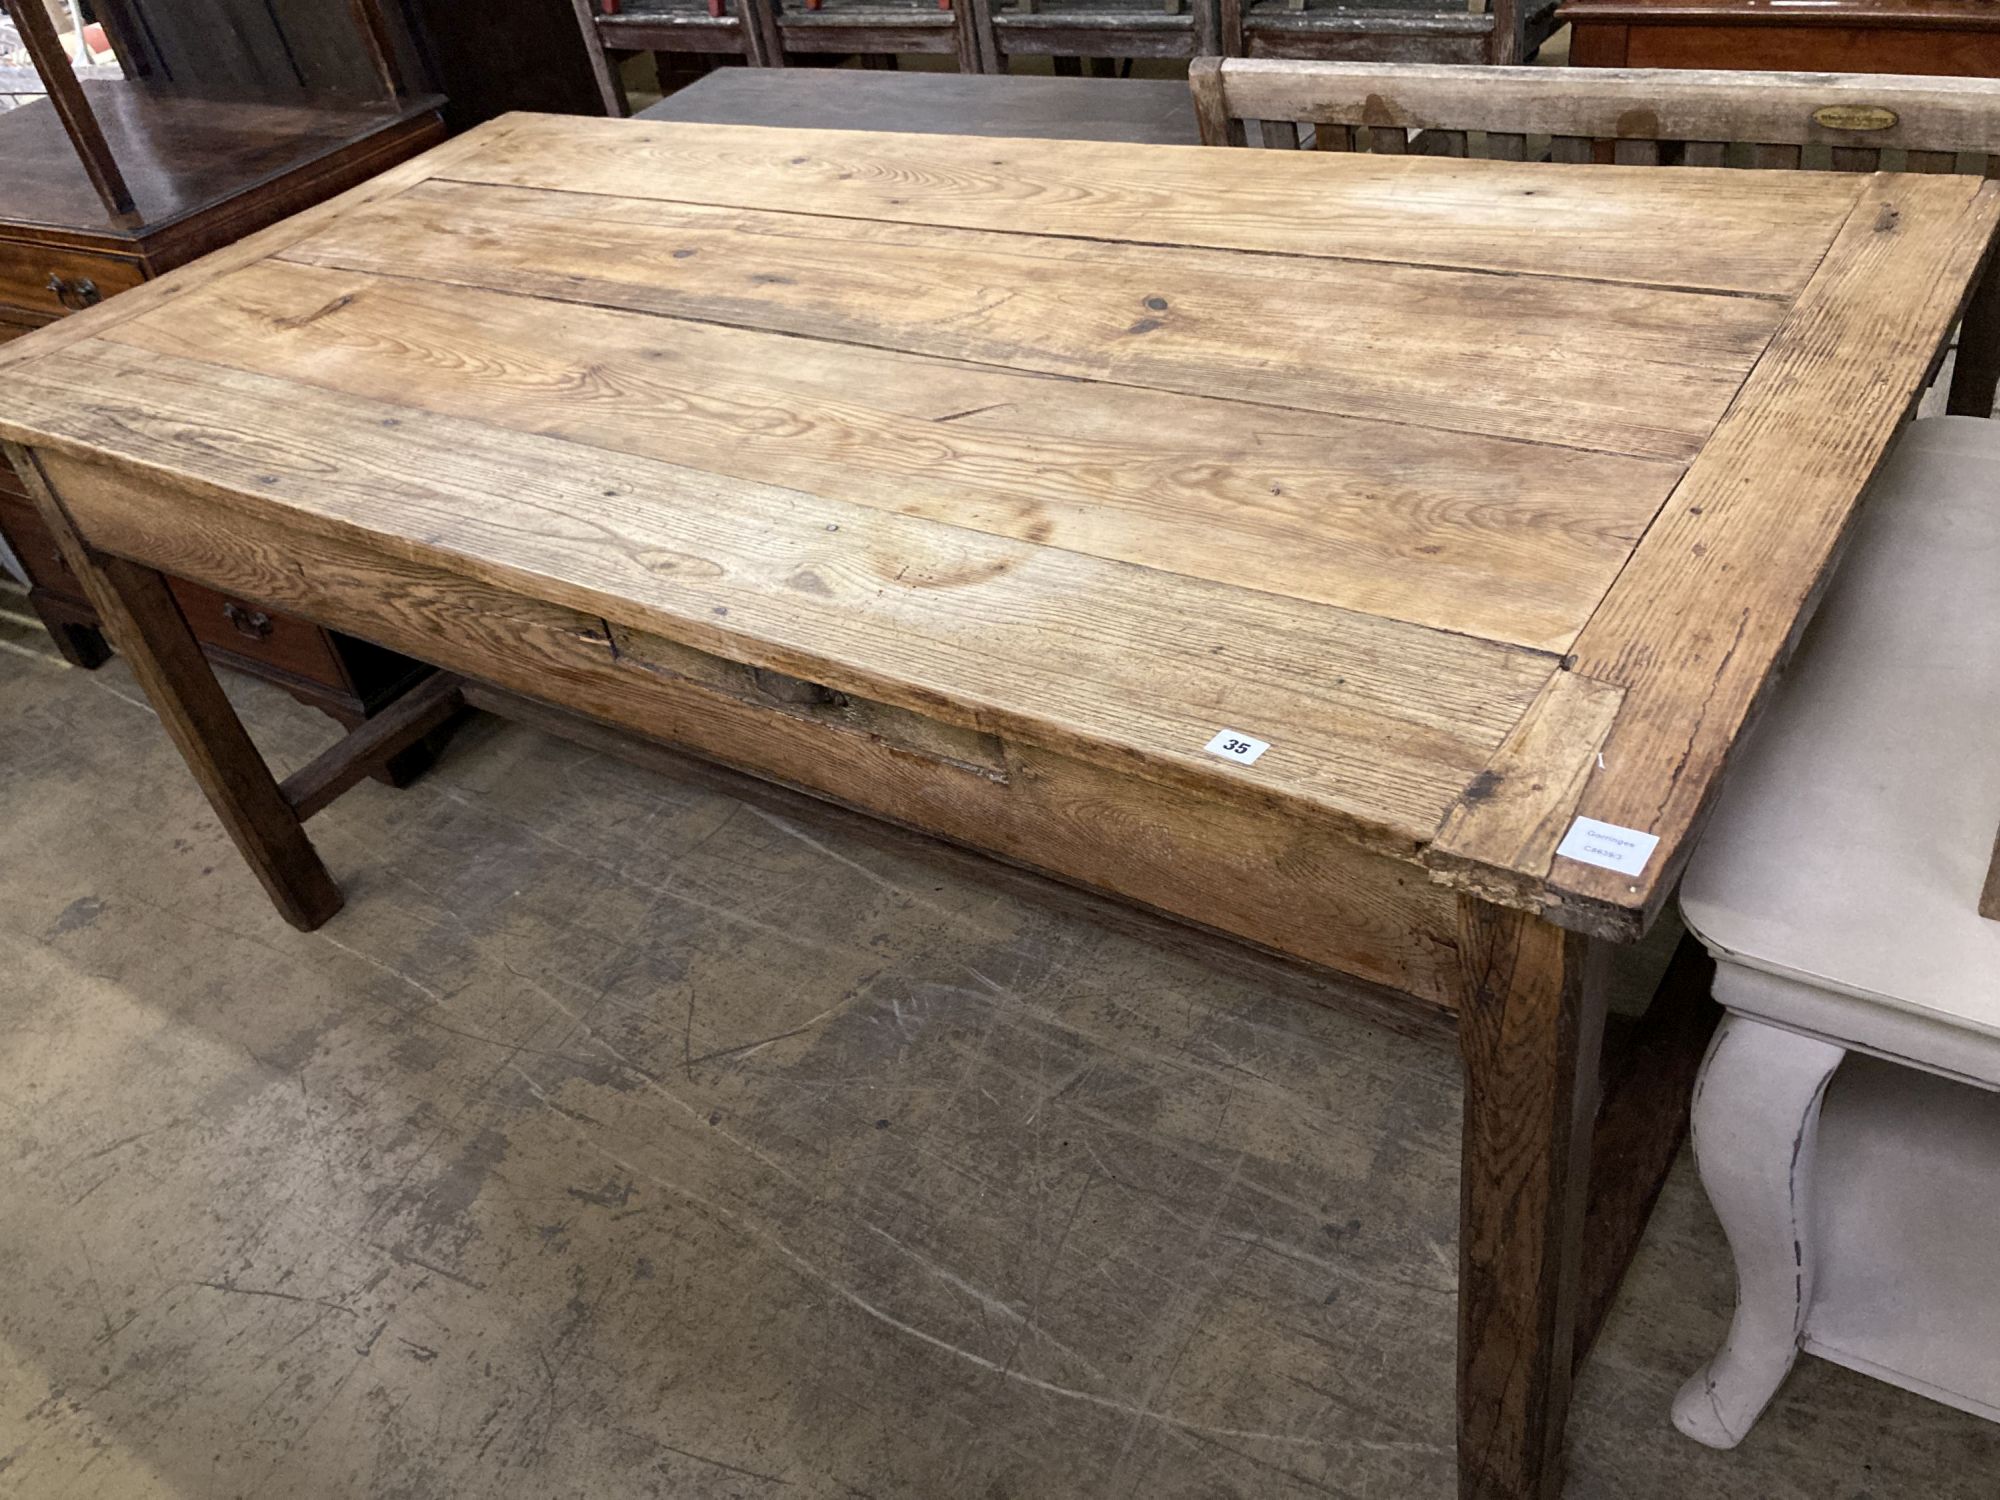 An early 19th century ash and pine rectangular kitchen table, width 186cm, depth 90cm, height 82cm